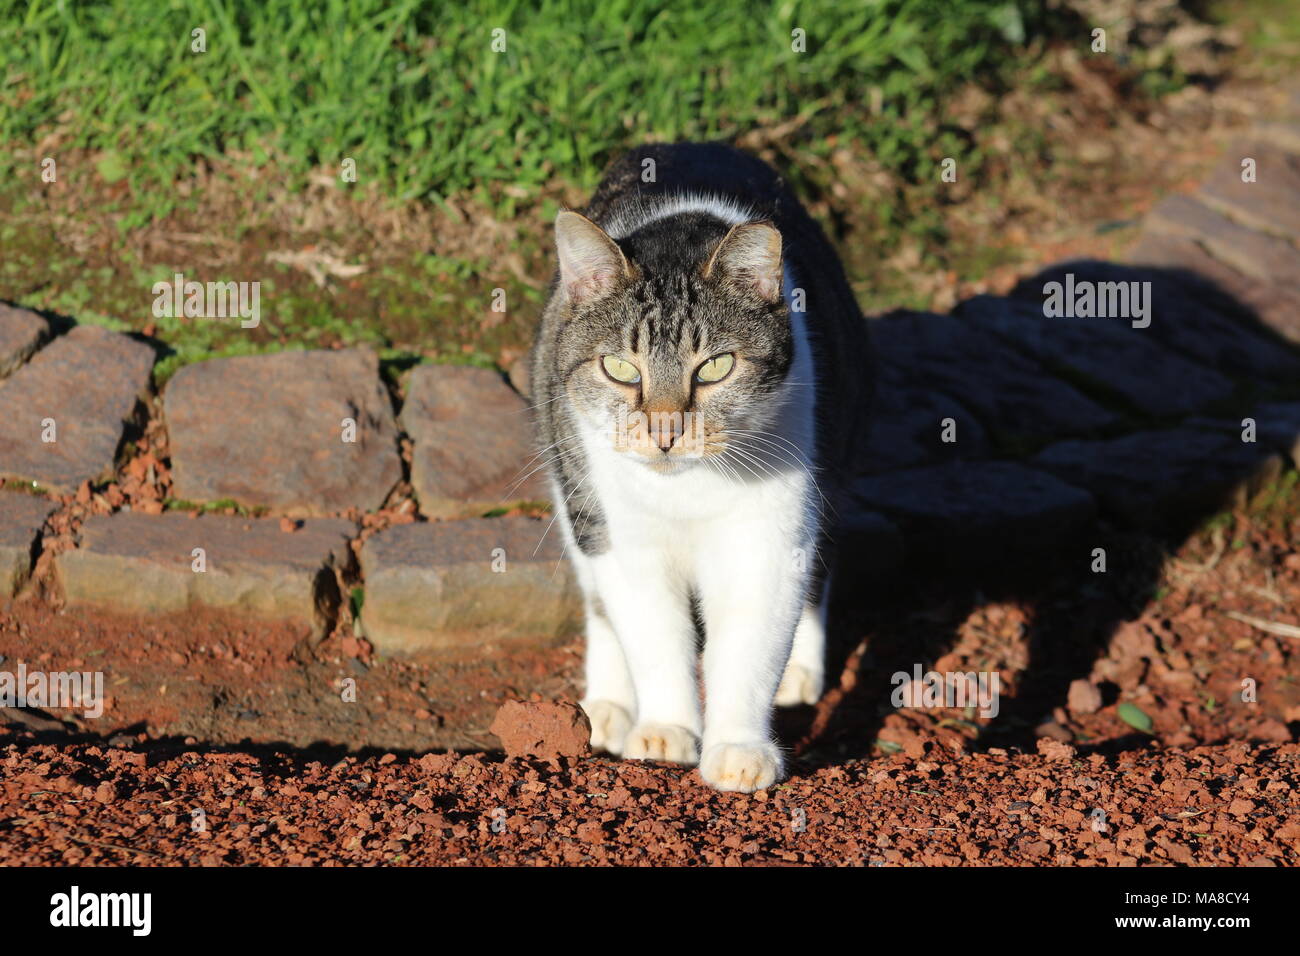 Cat slow walking and sight fixed on the prey. Stock Photo